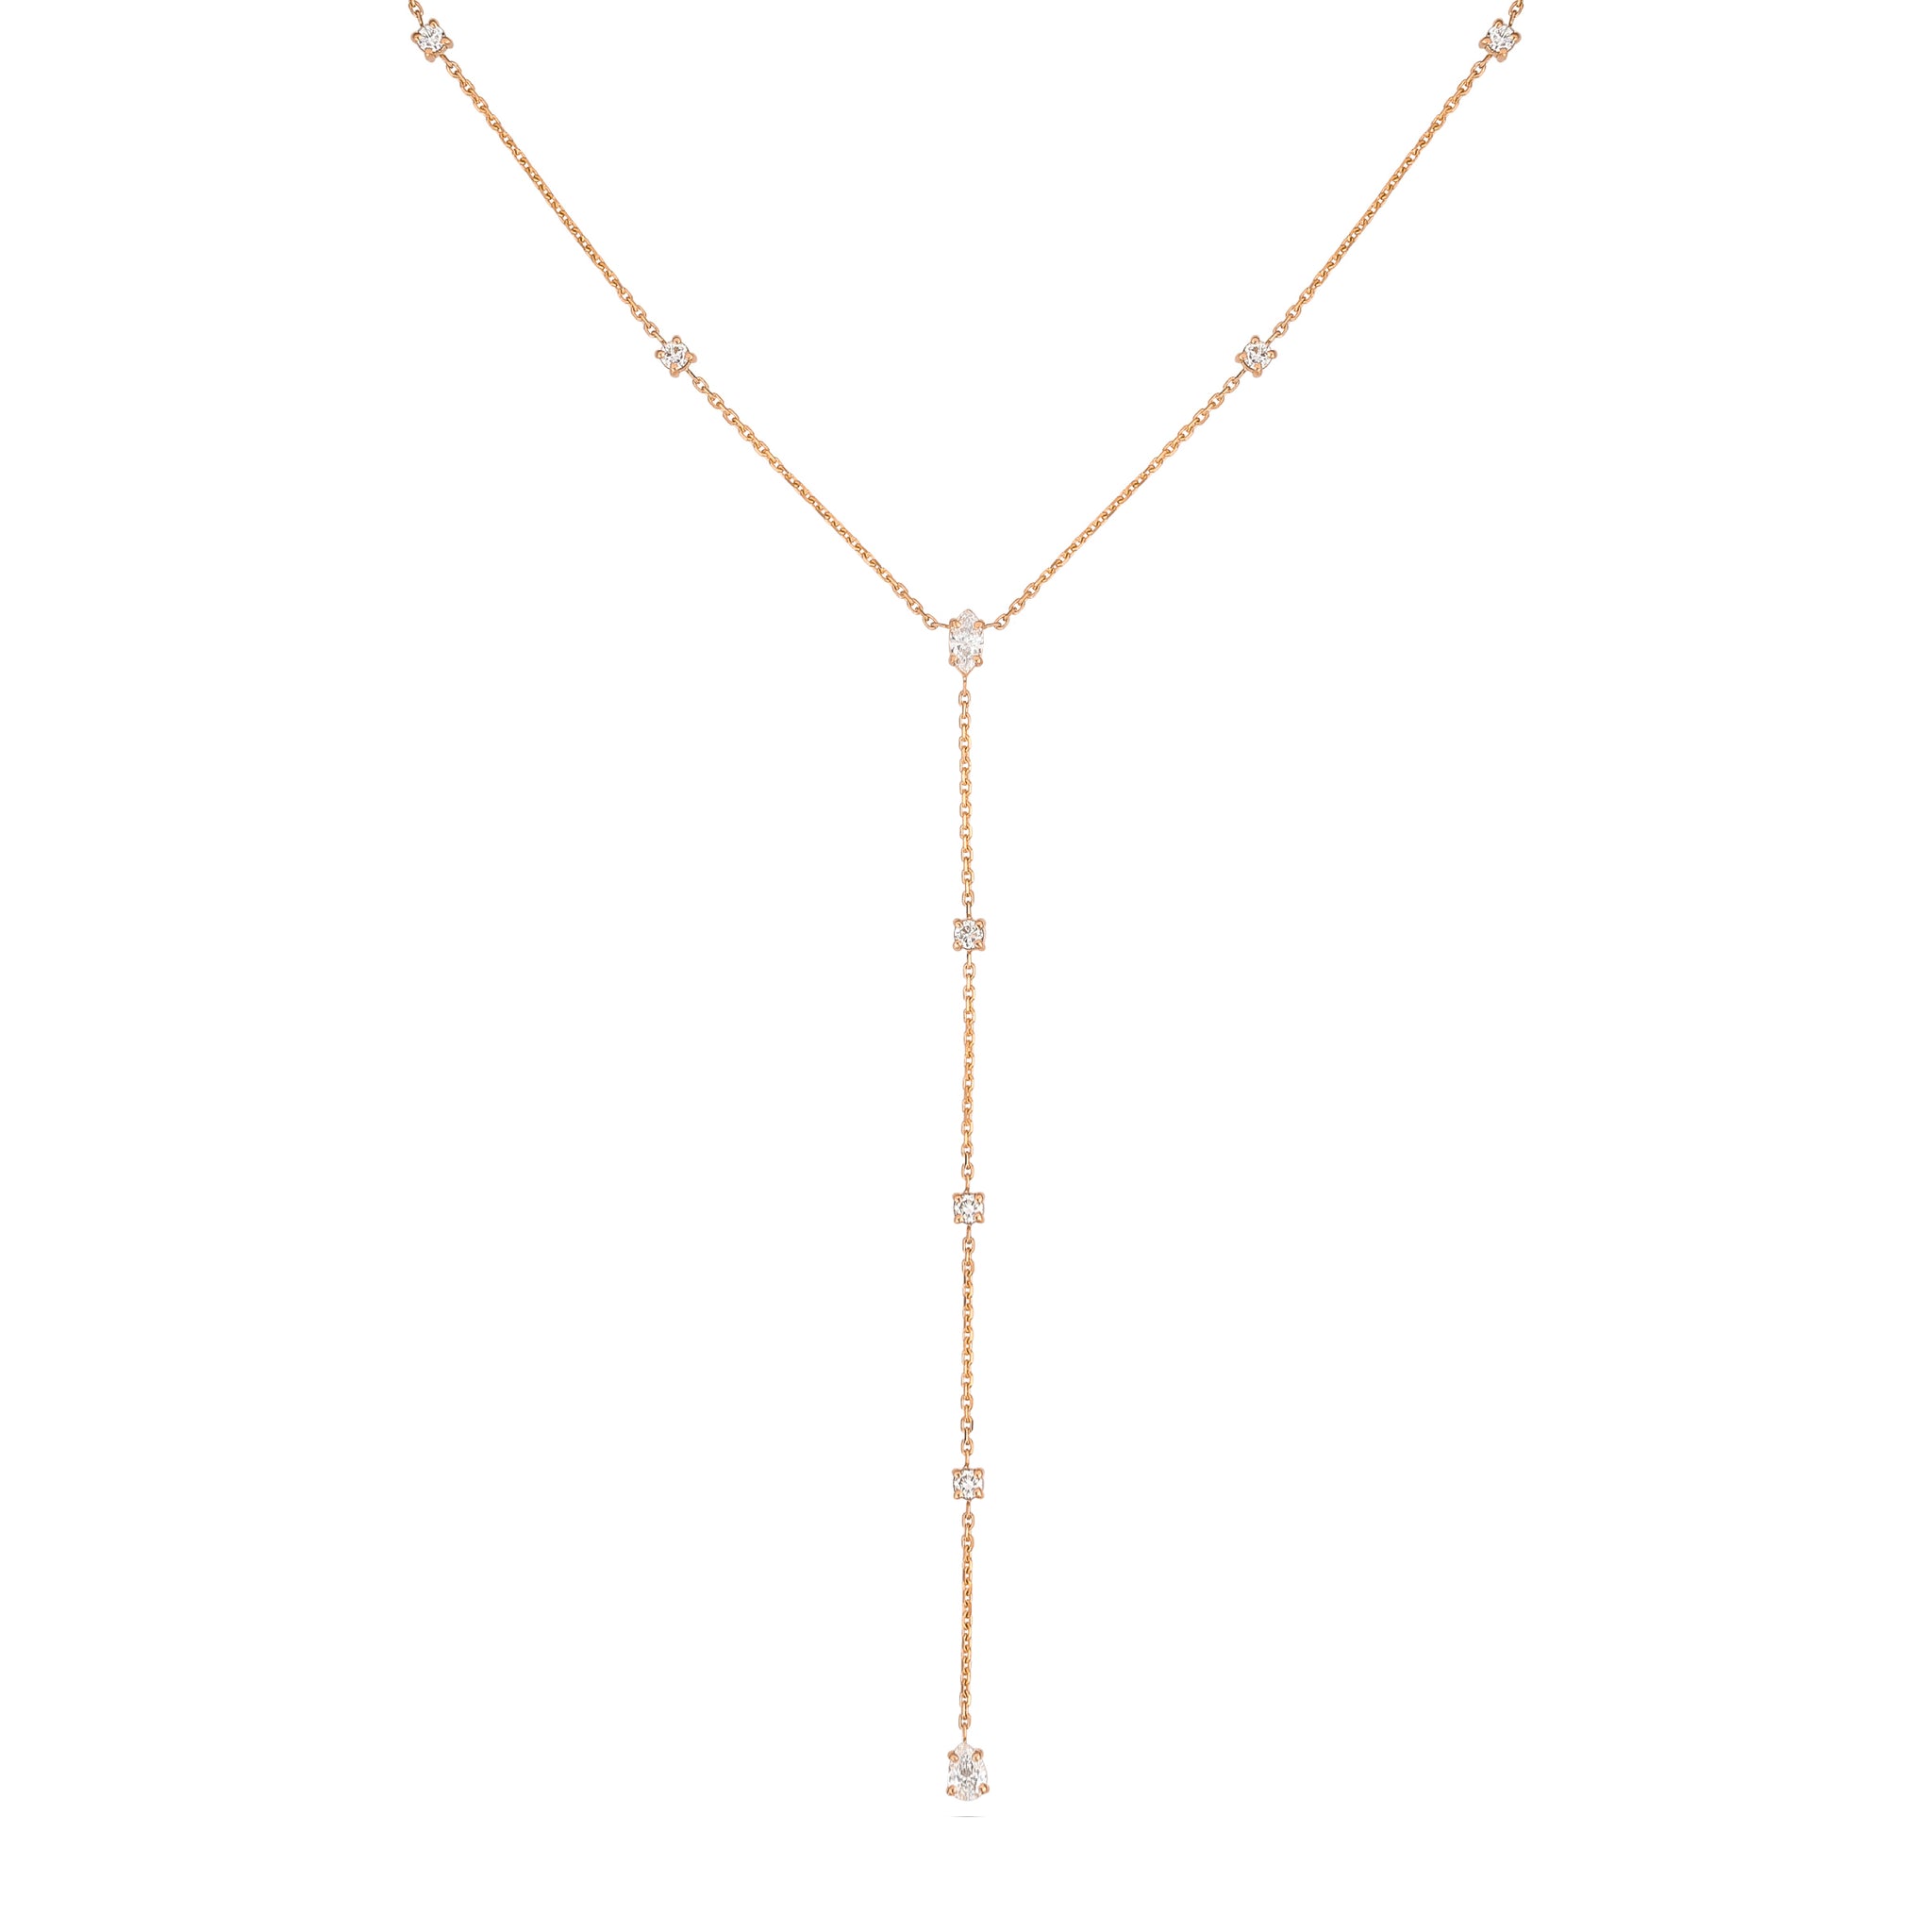 Gaia Long Drop Diamond Necklace in Rose Gold